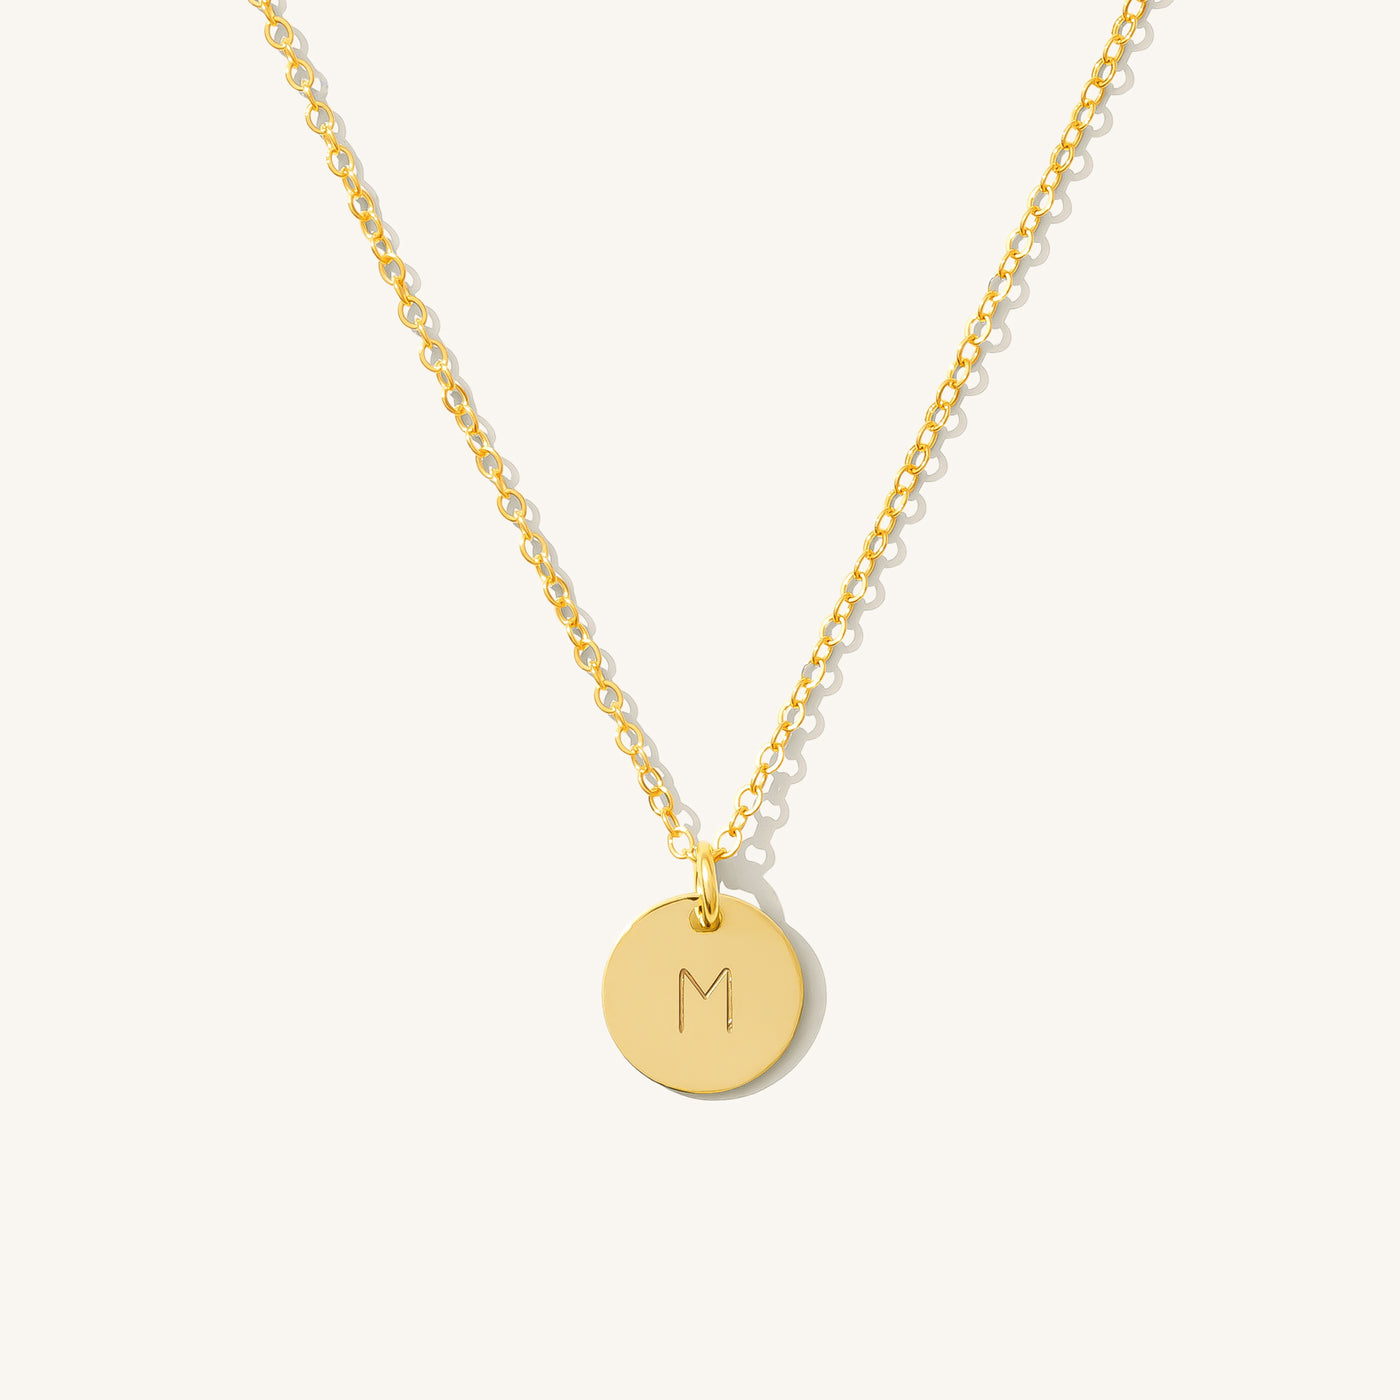 M Dainty Initial Necklace